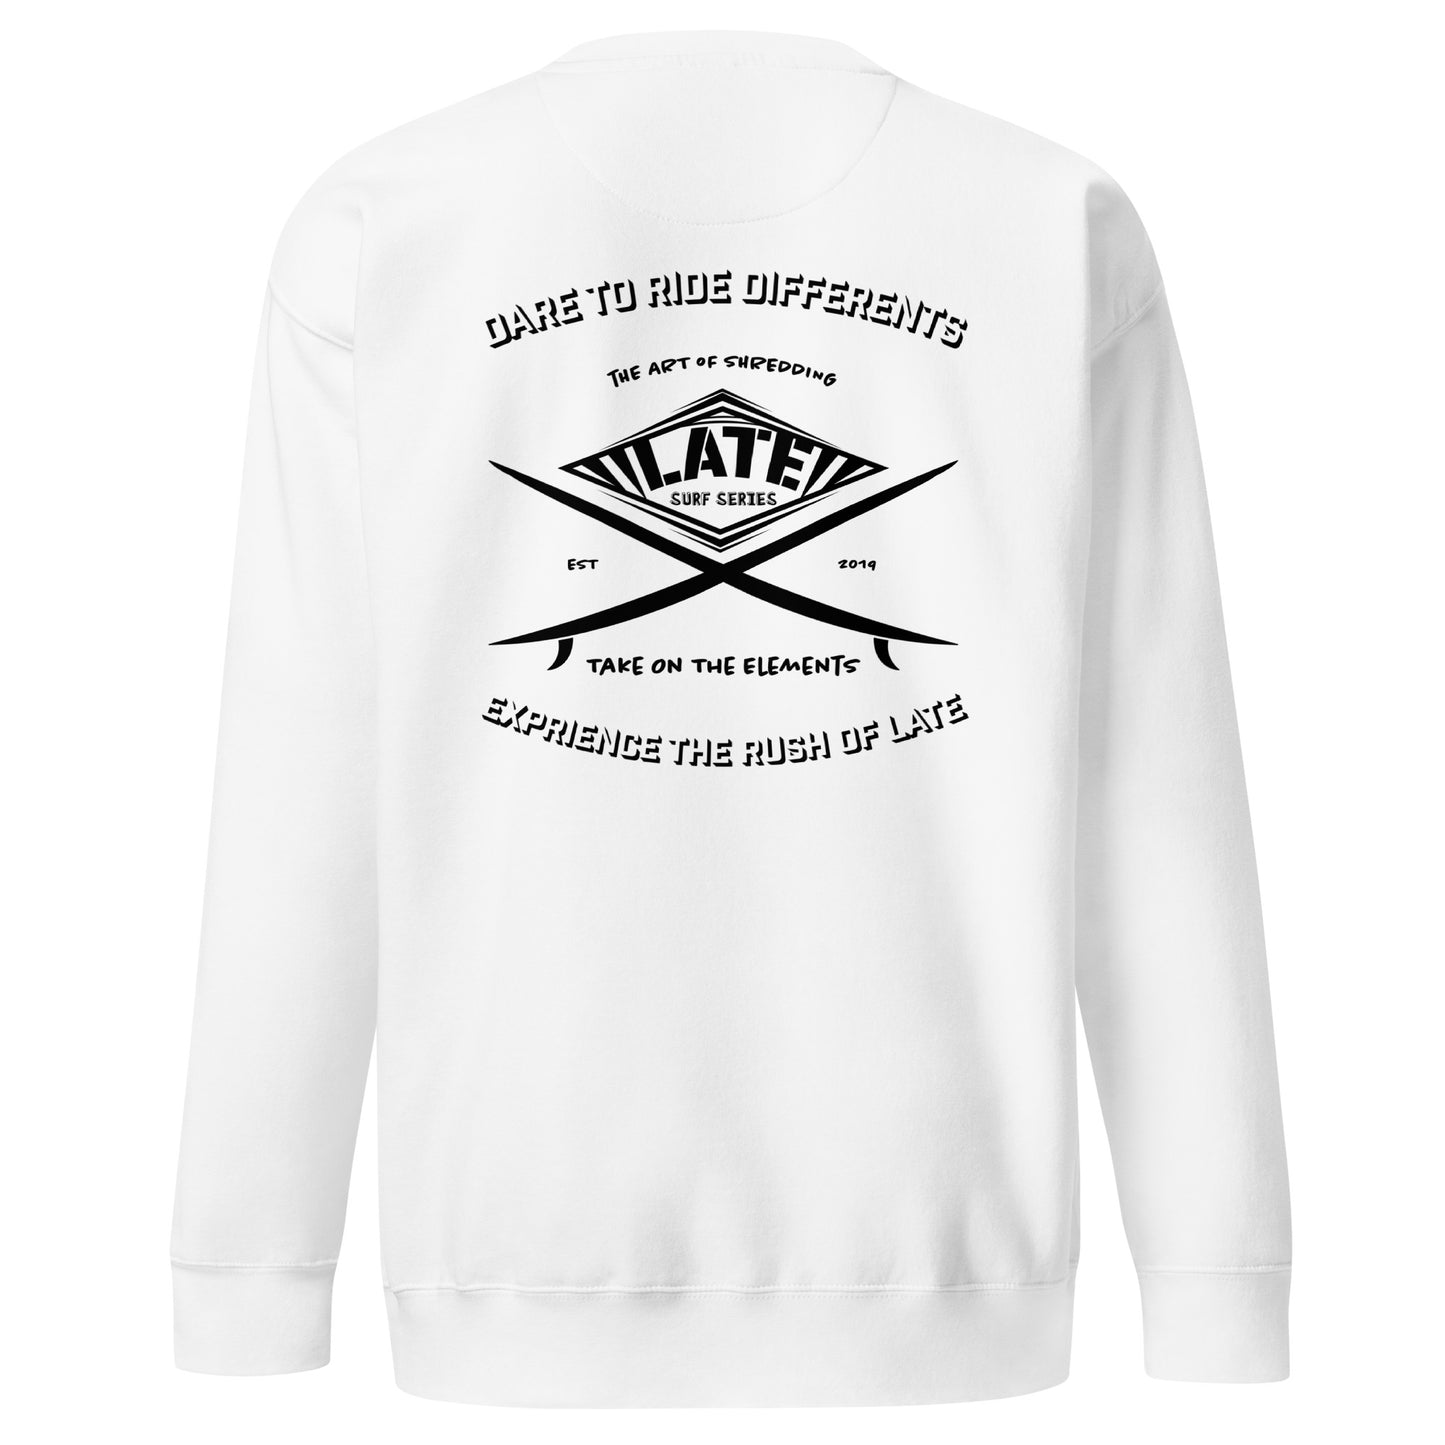 Sweatshirt surfboard dare to ride differents Take On The Elements experience the rush with Late de dos unisex couleur blanc